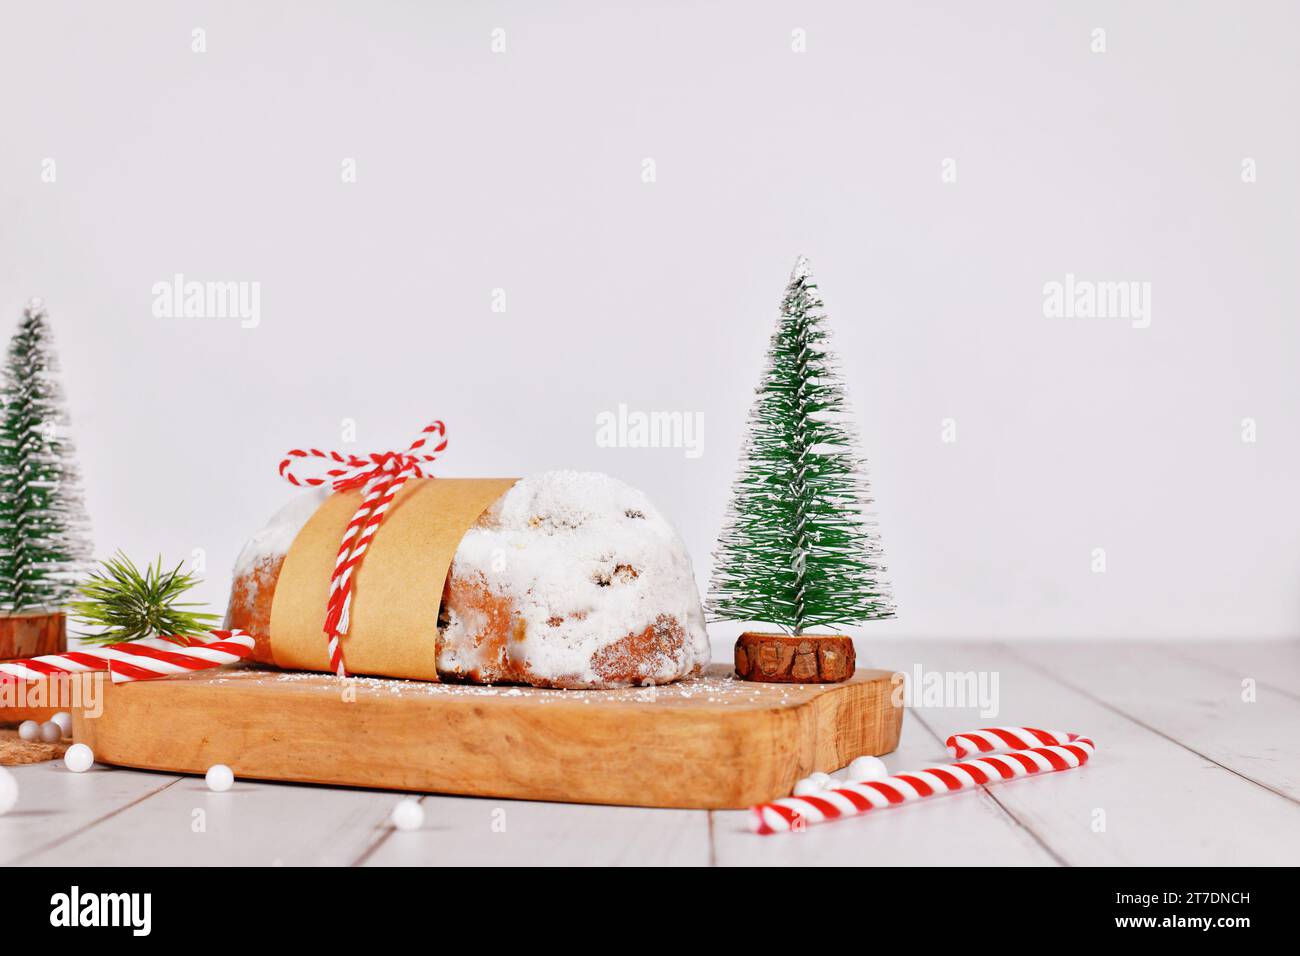 German Stollen cake, a fruit bread with nuts, spices, and dried fruits with powdered sugar traditionally served during Christmas time Stock Photo